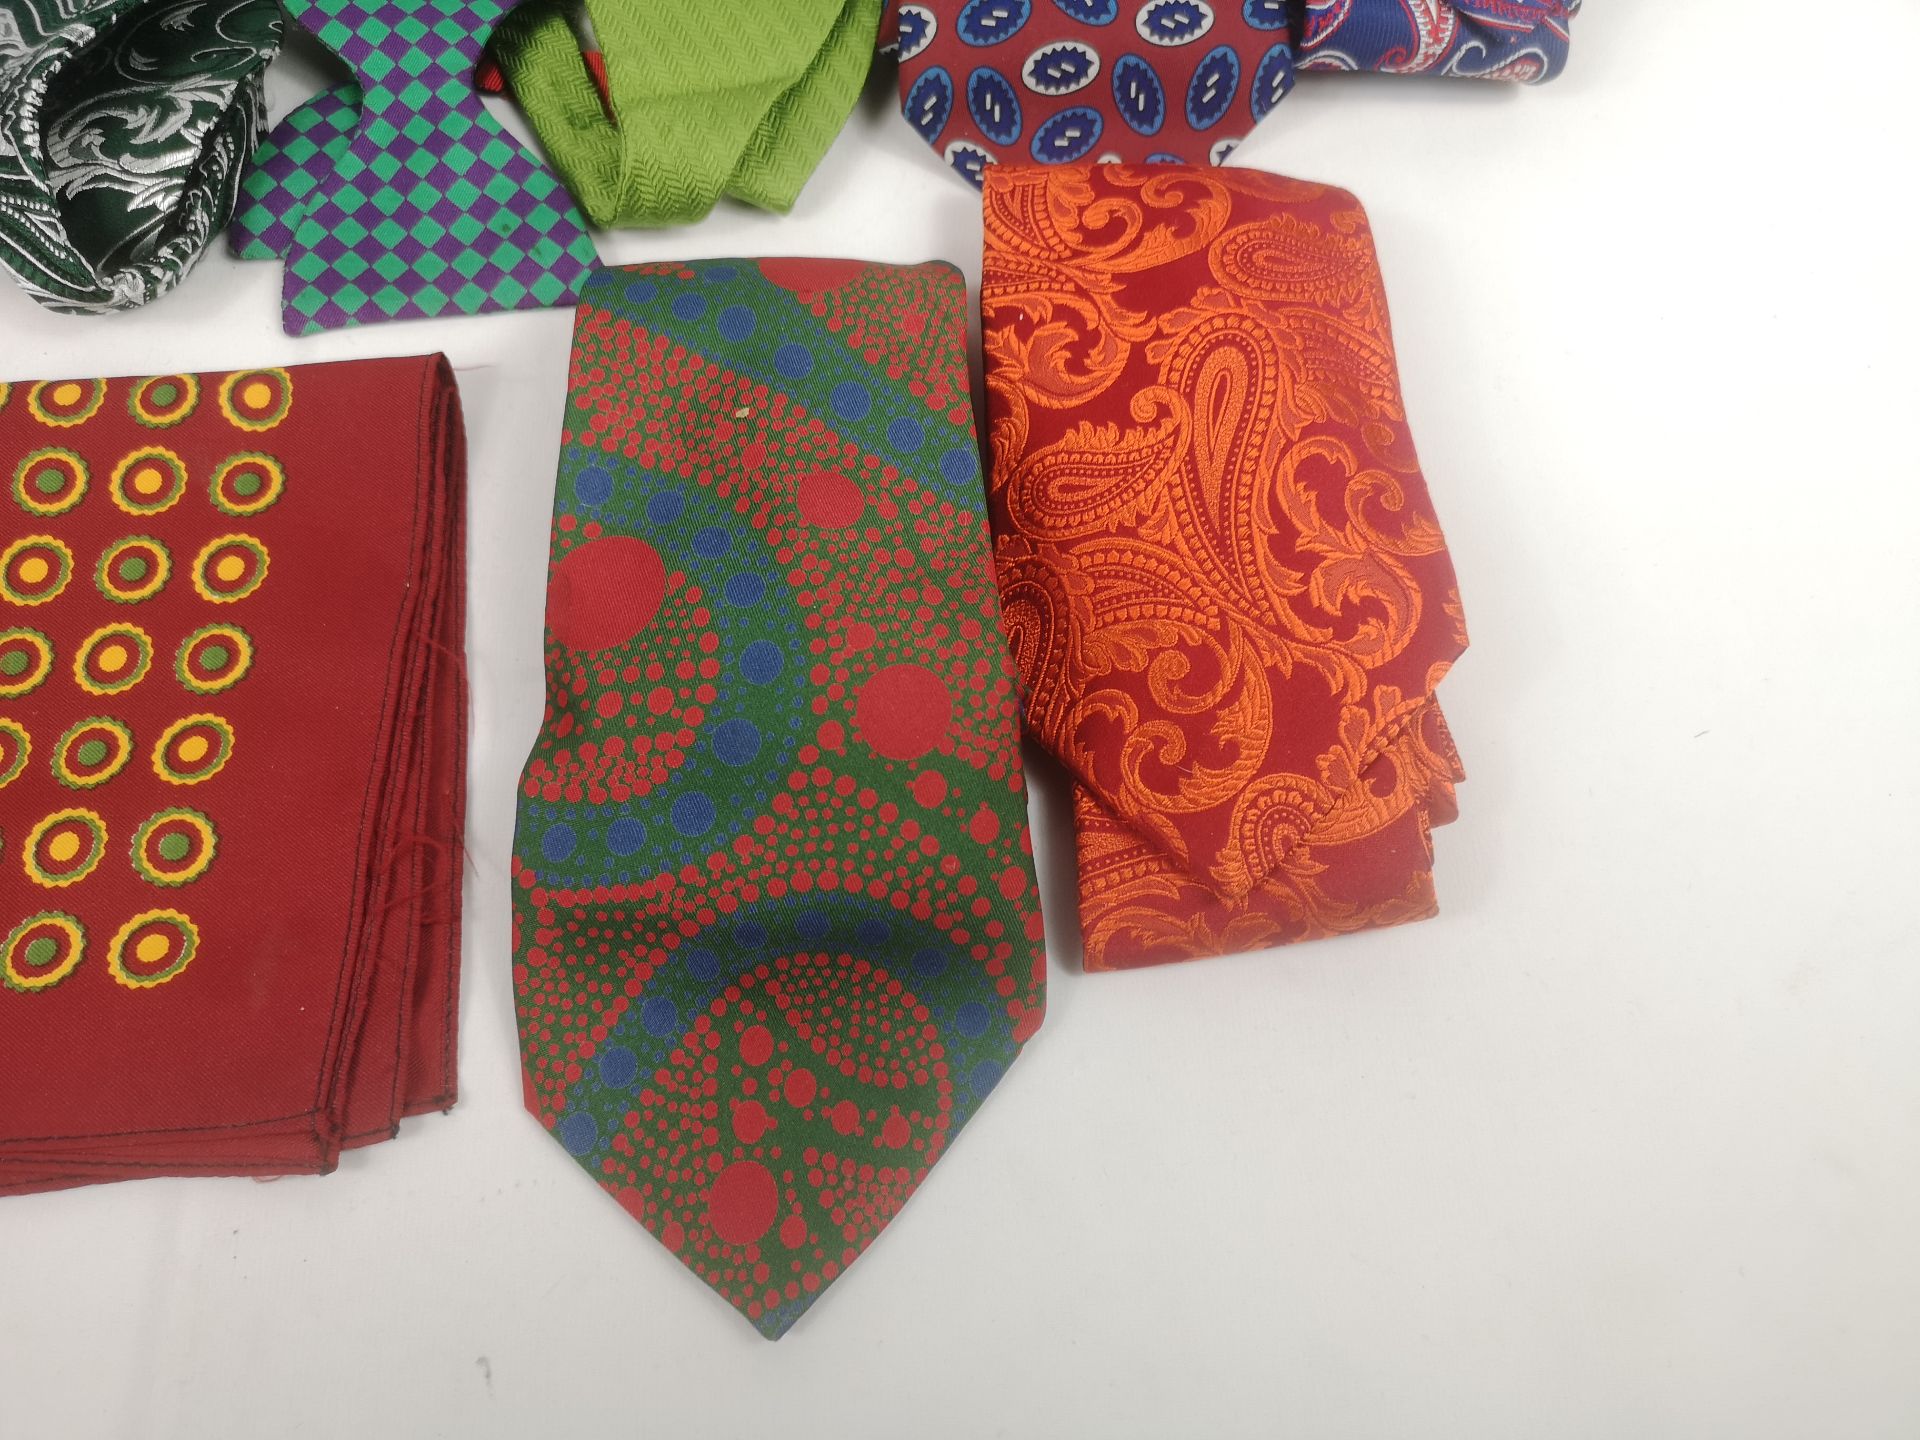 Eight Turnbull and Asser silk ties together with a quantity of Turnbull and Asser bow ties - Image 5 of 5